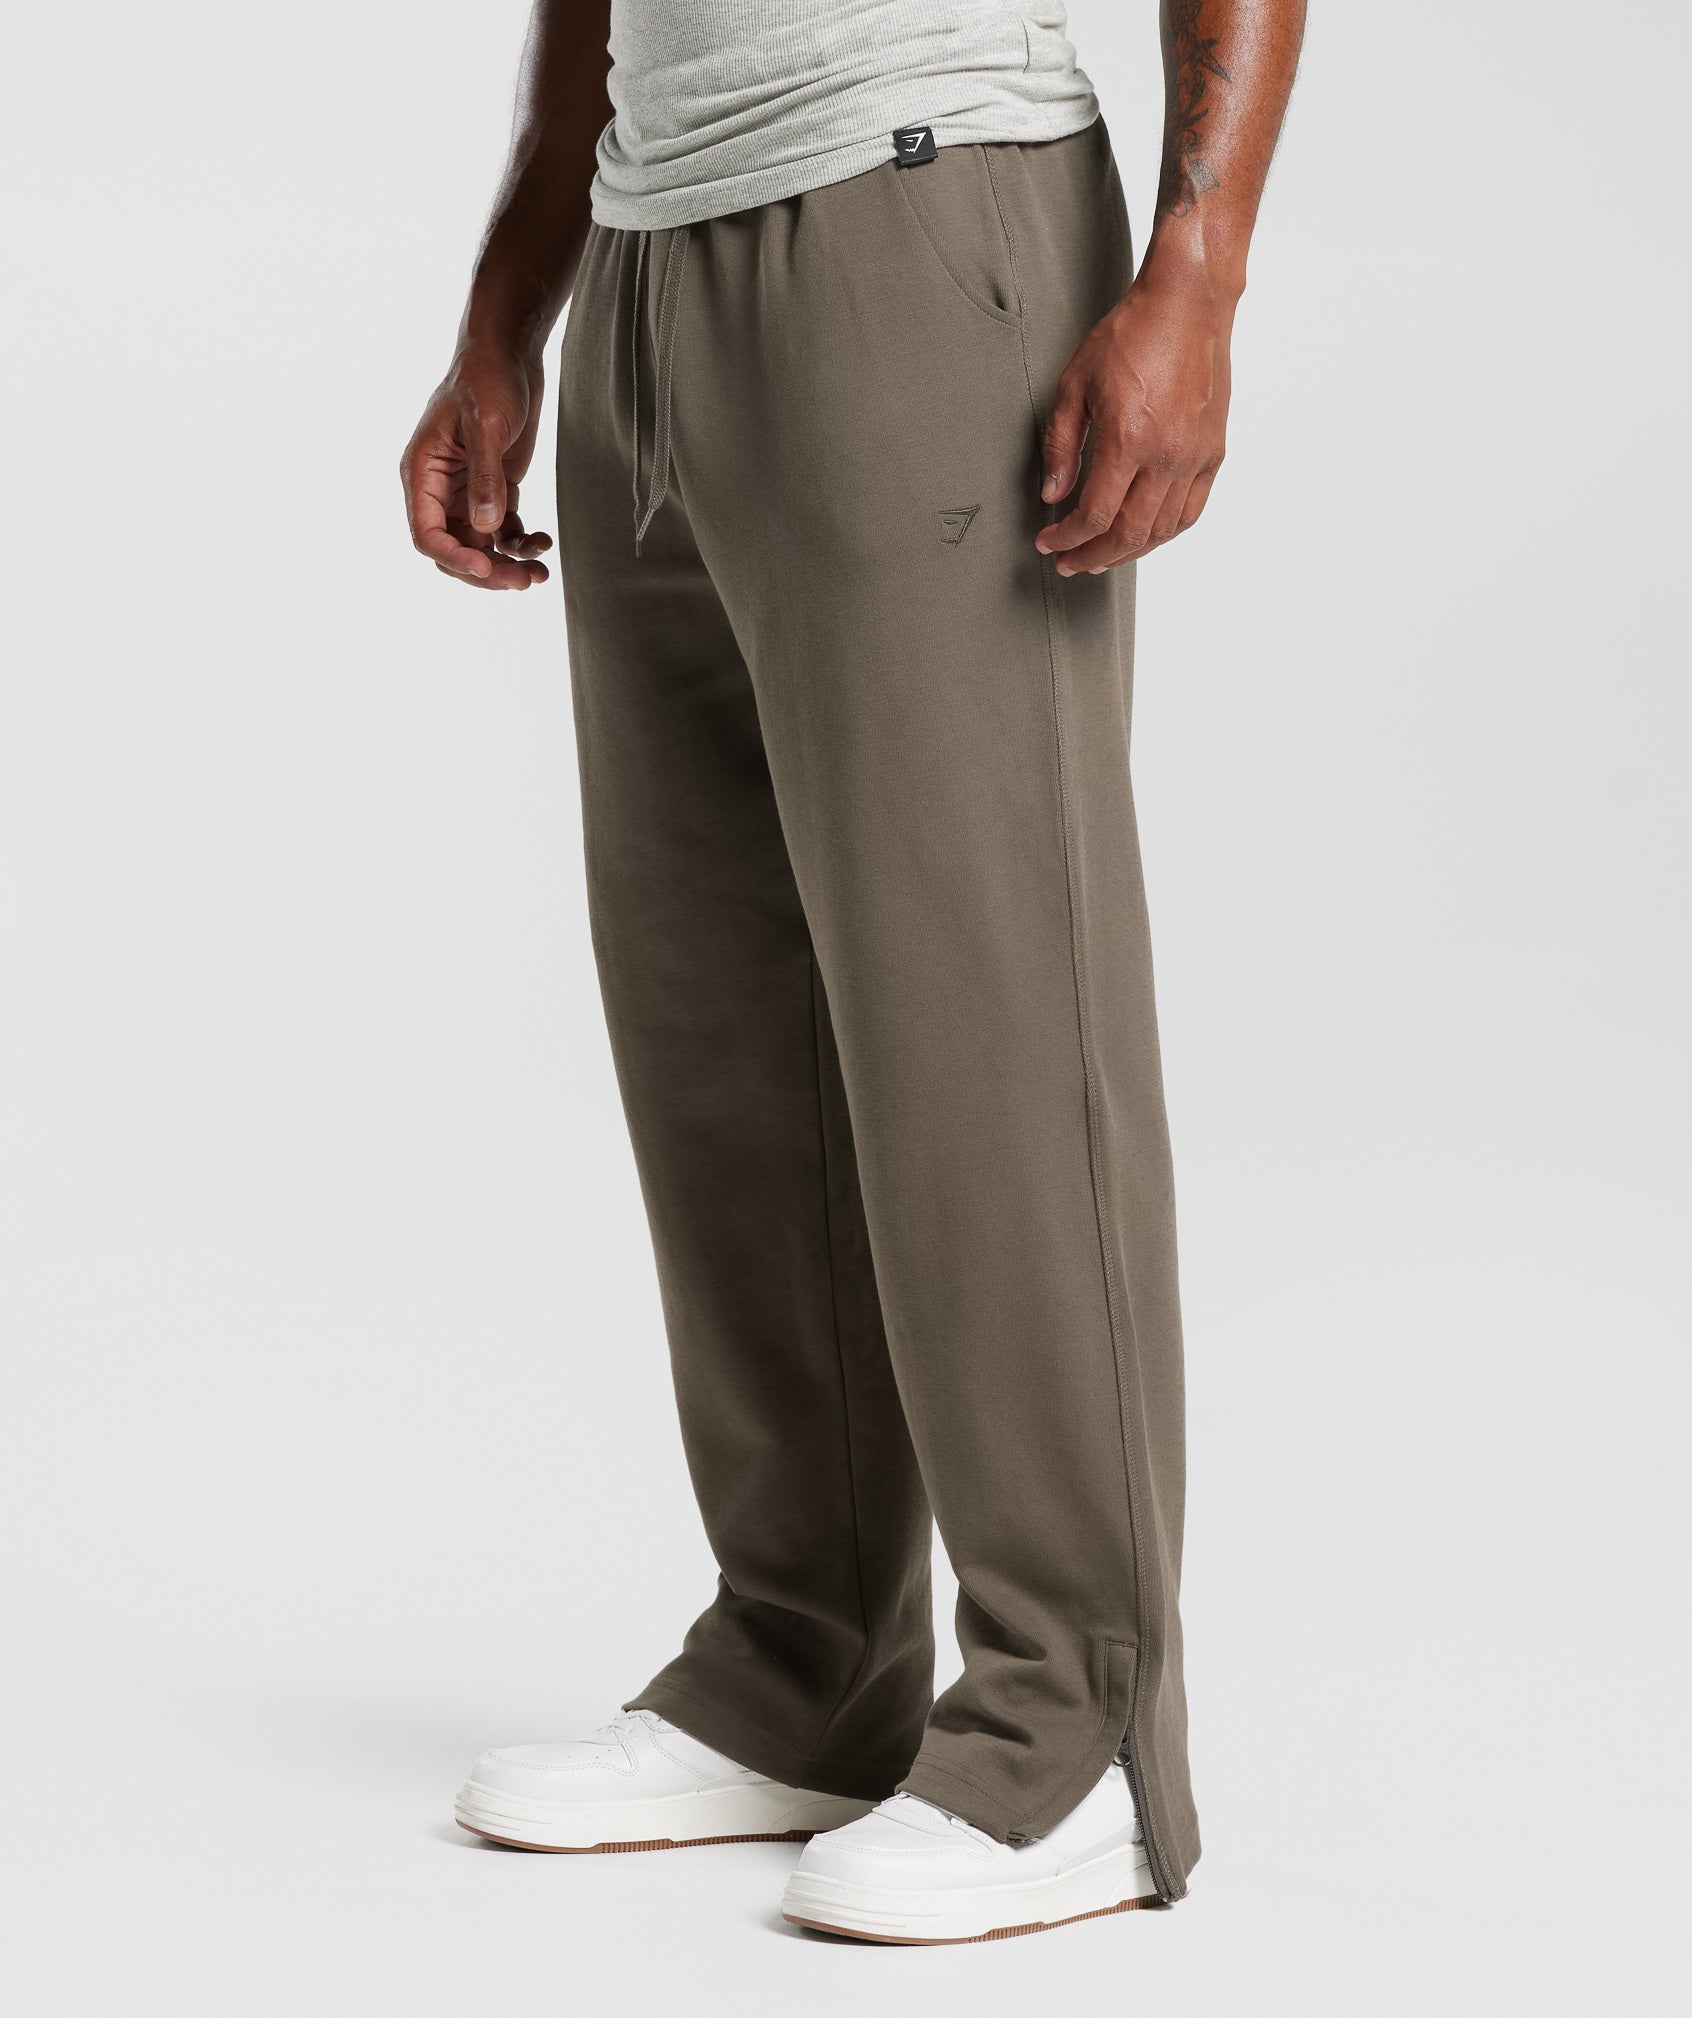 Rest Day Track Pants in Camo Brown - view 3